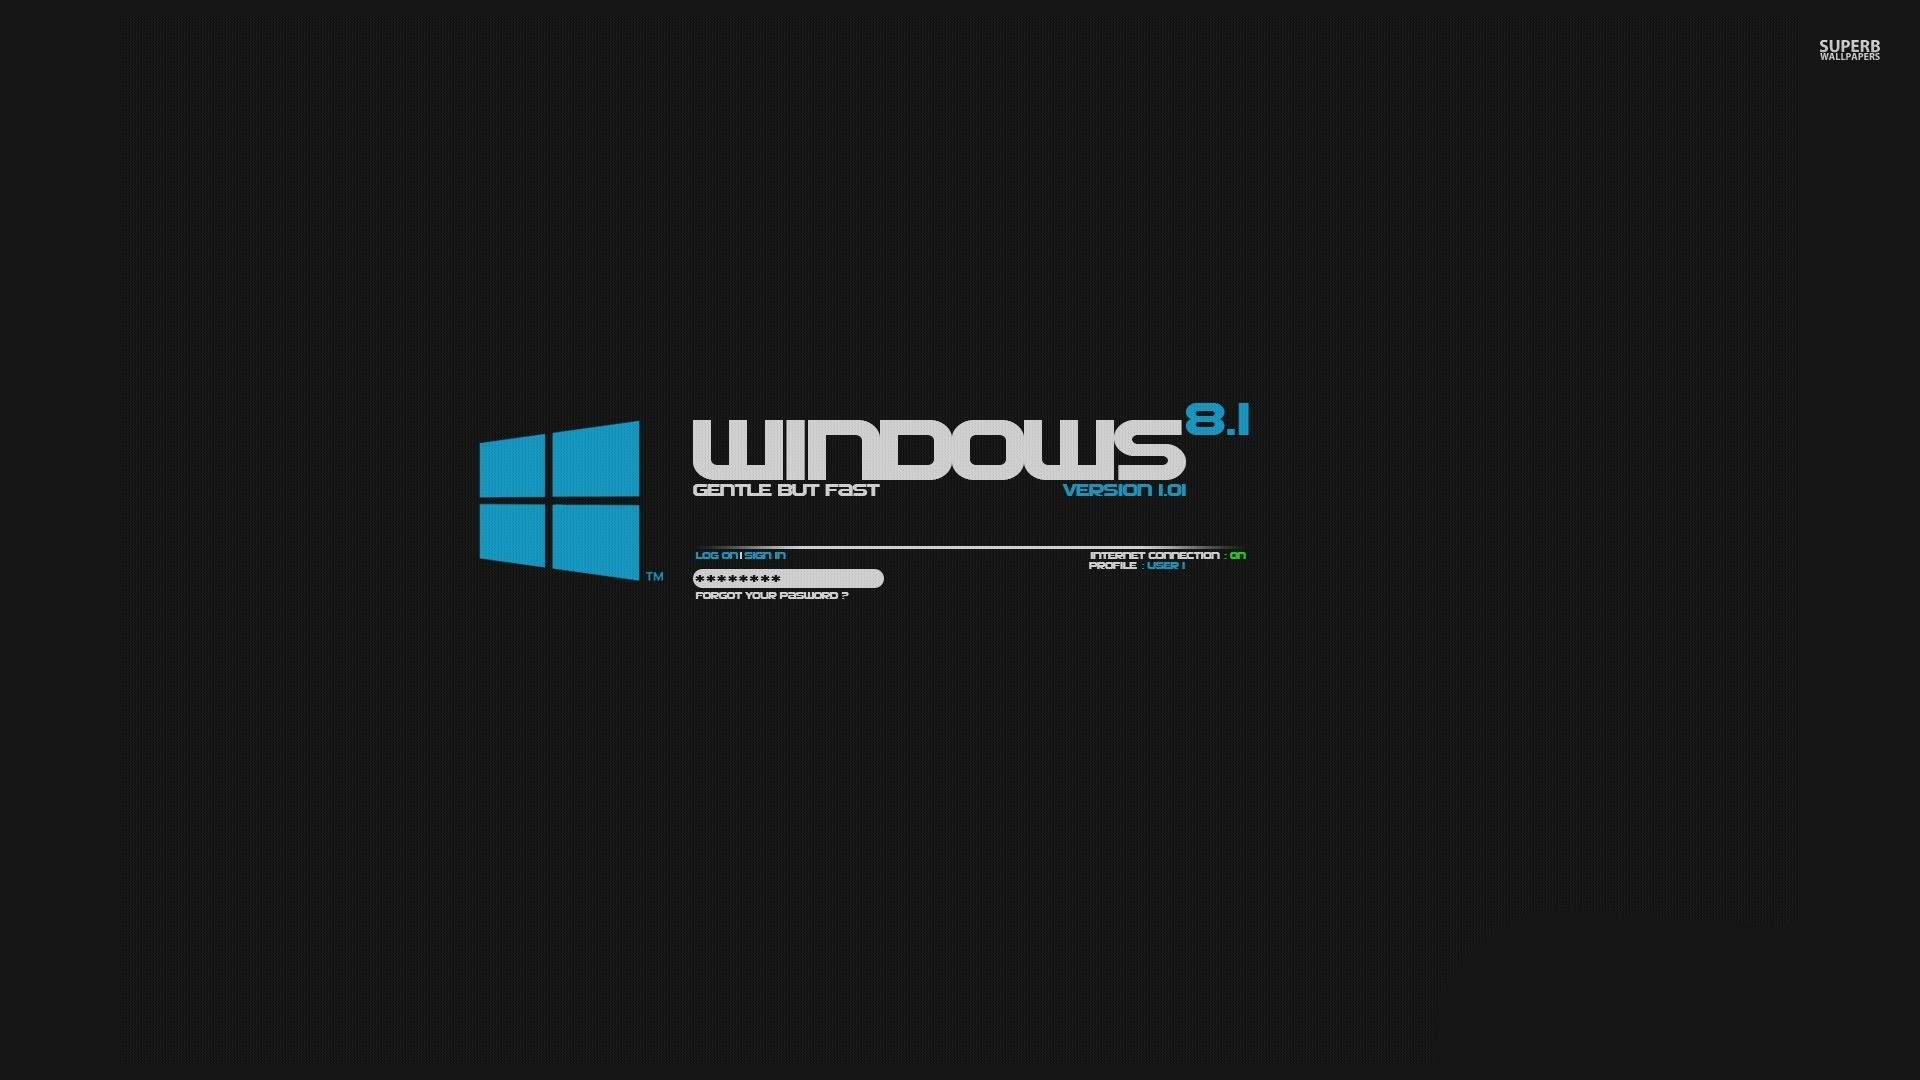 1920x1080 Windows 8.1 in Black Background Wallpaper - MixHD wallpapers